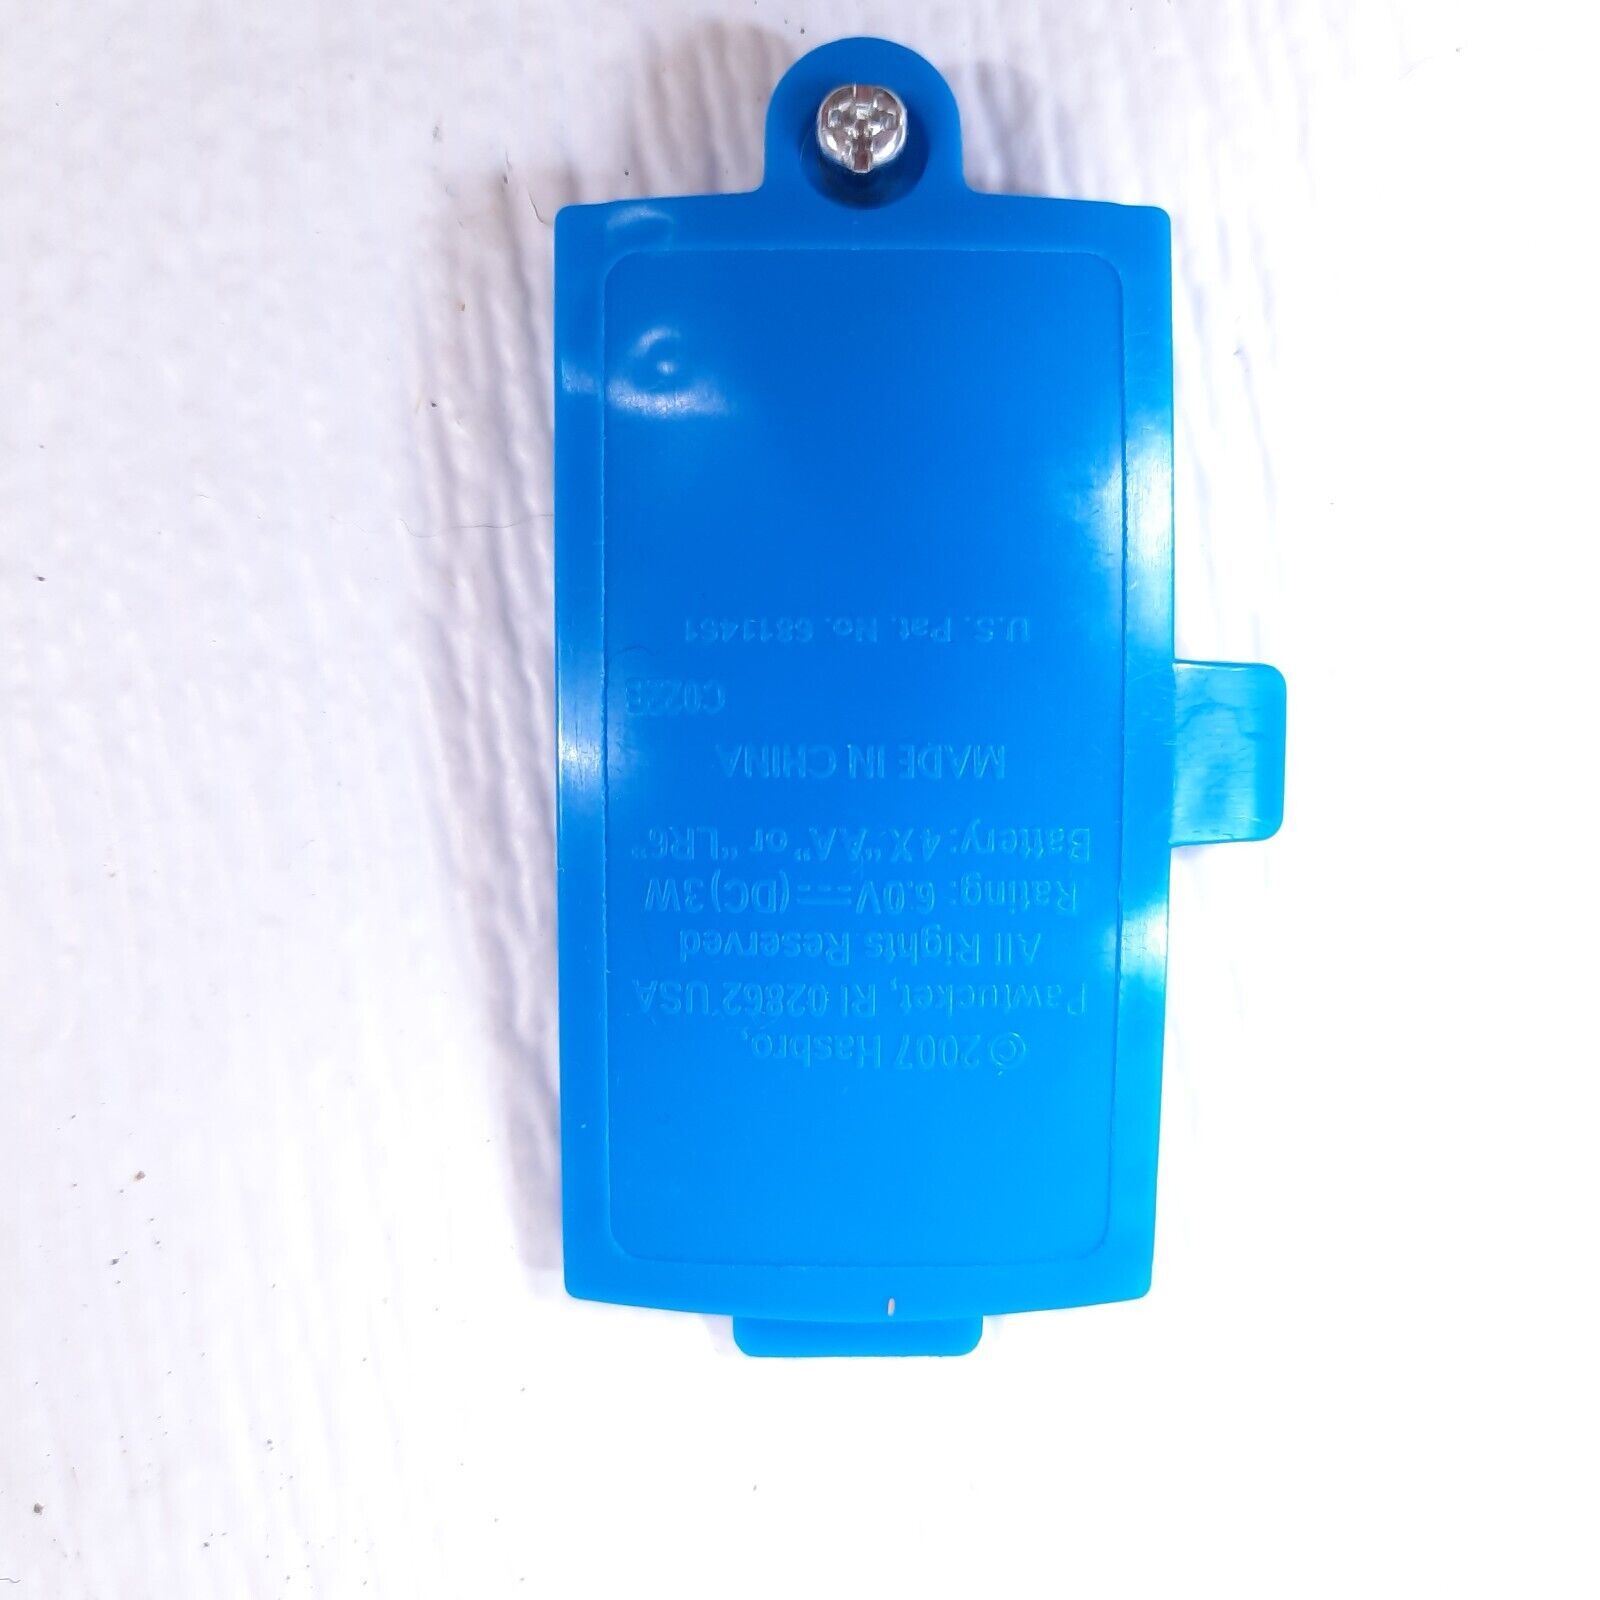 Hasbro Fur Real Friends Squawkers McCaw Parrot blue Battery pack cover PART ONLY - $22.00